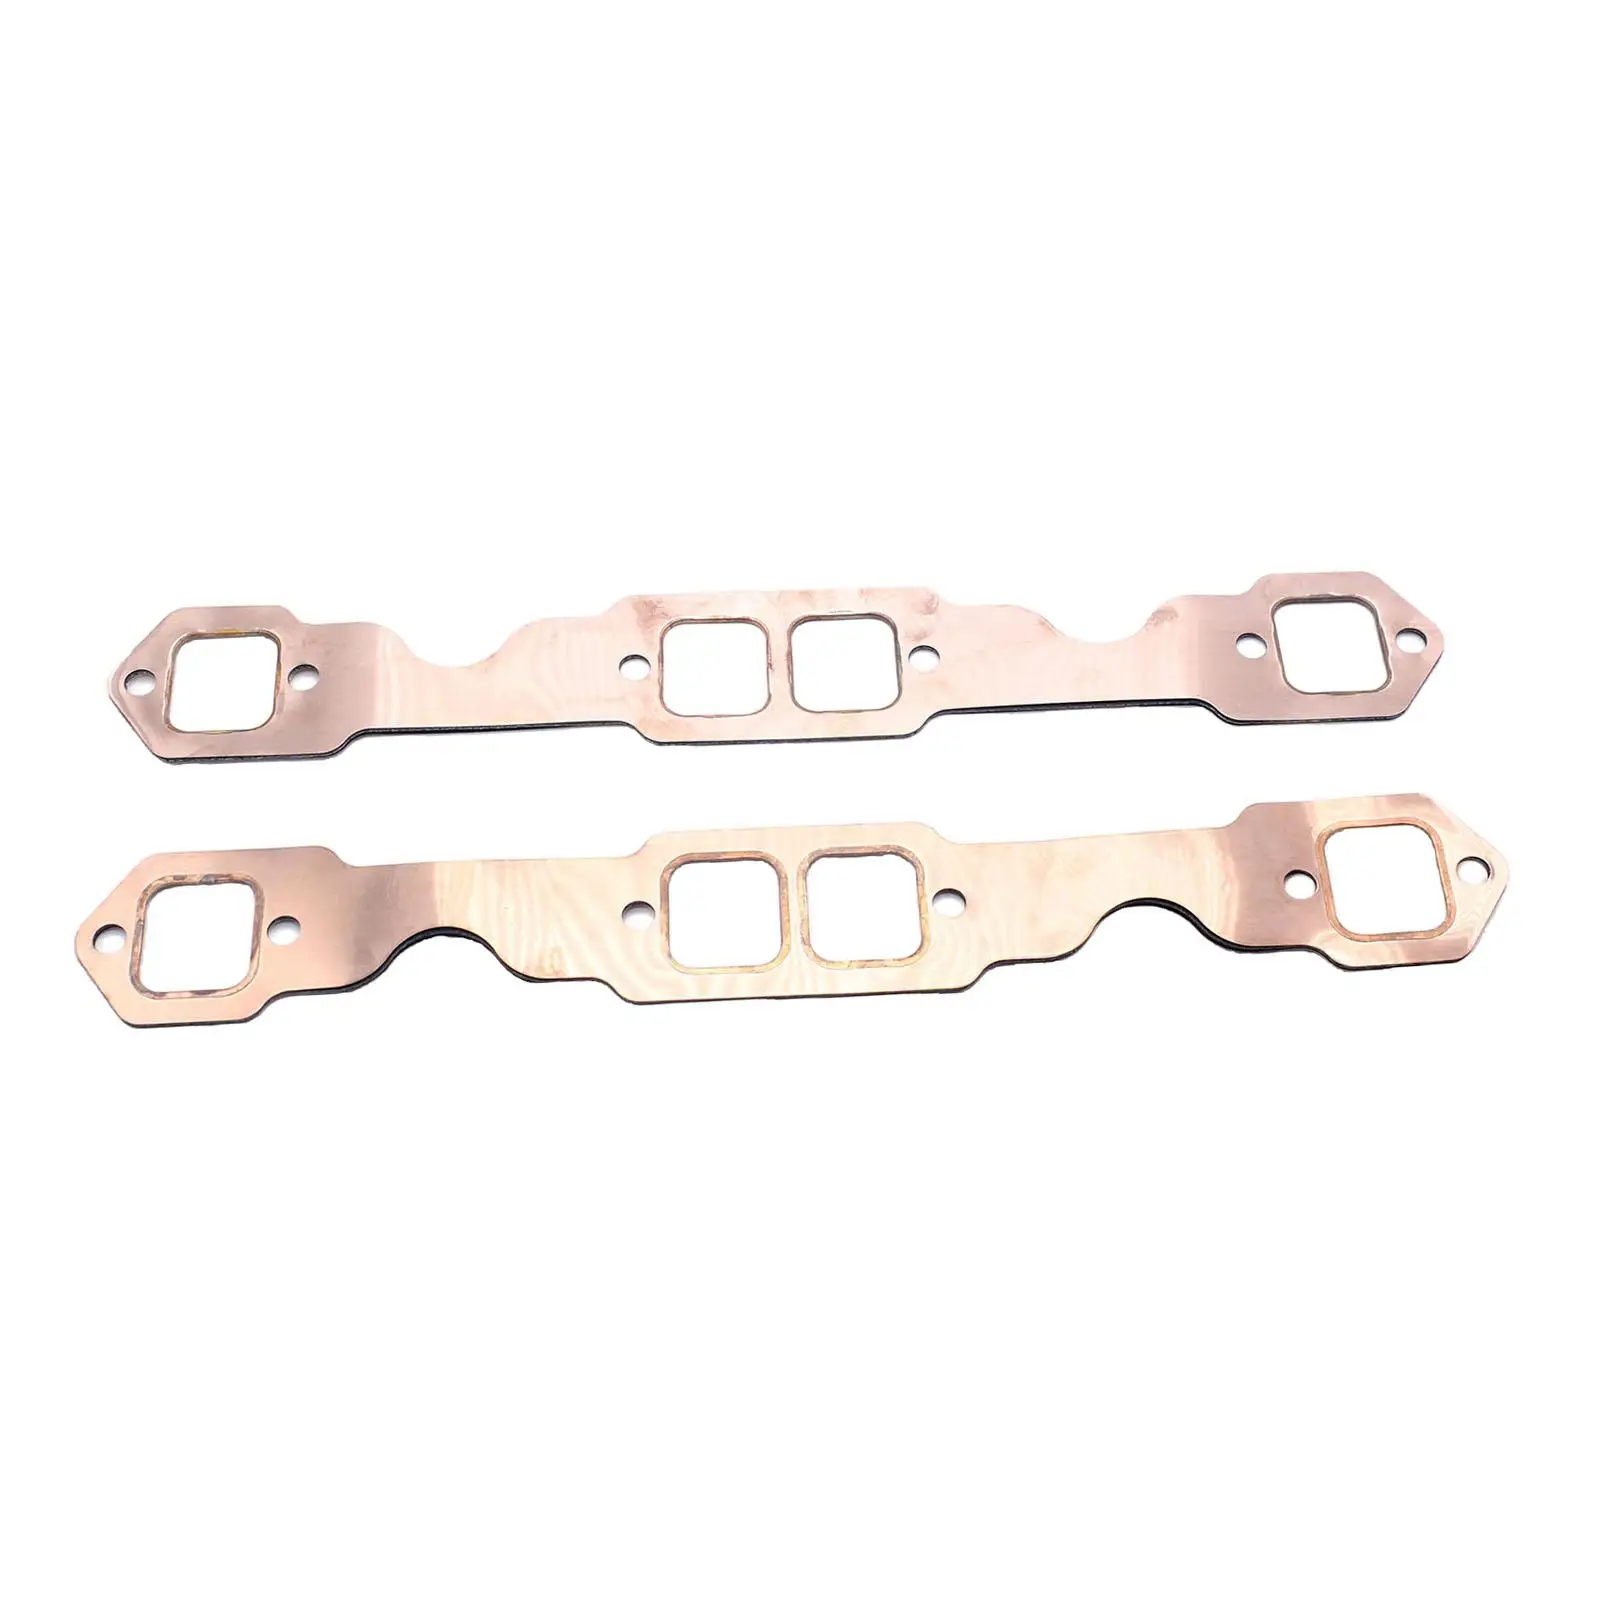 2 pieces C Copper Header exhaust gasket for Chevy 283 327 350 383 400